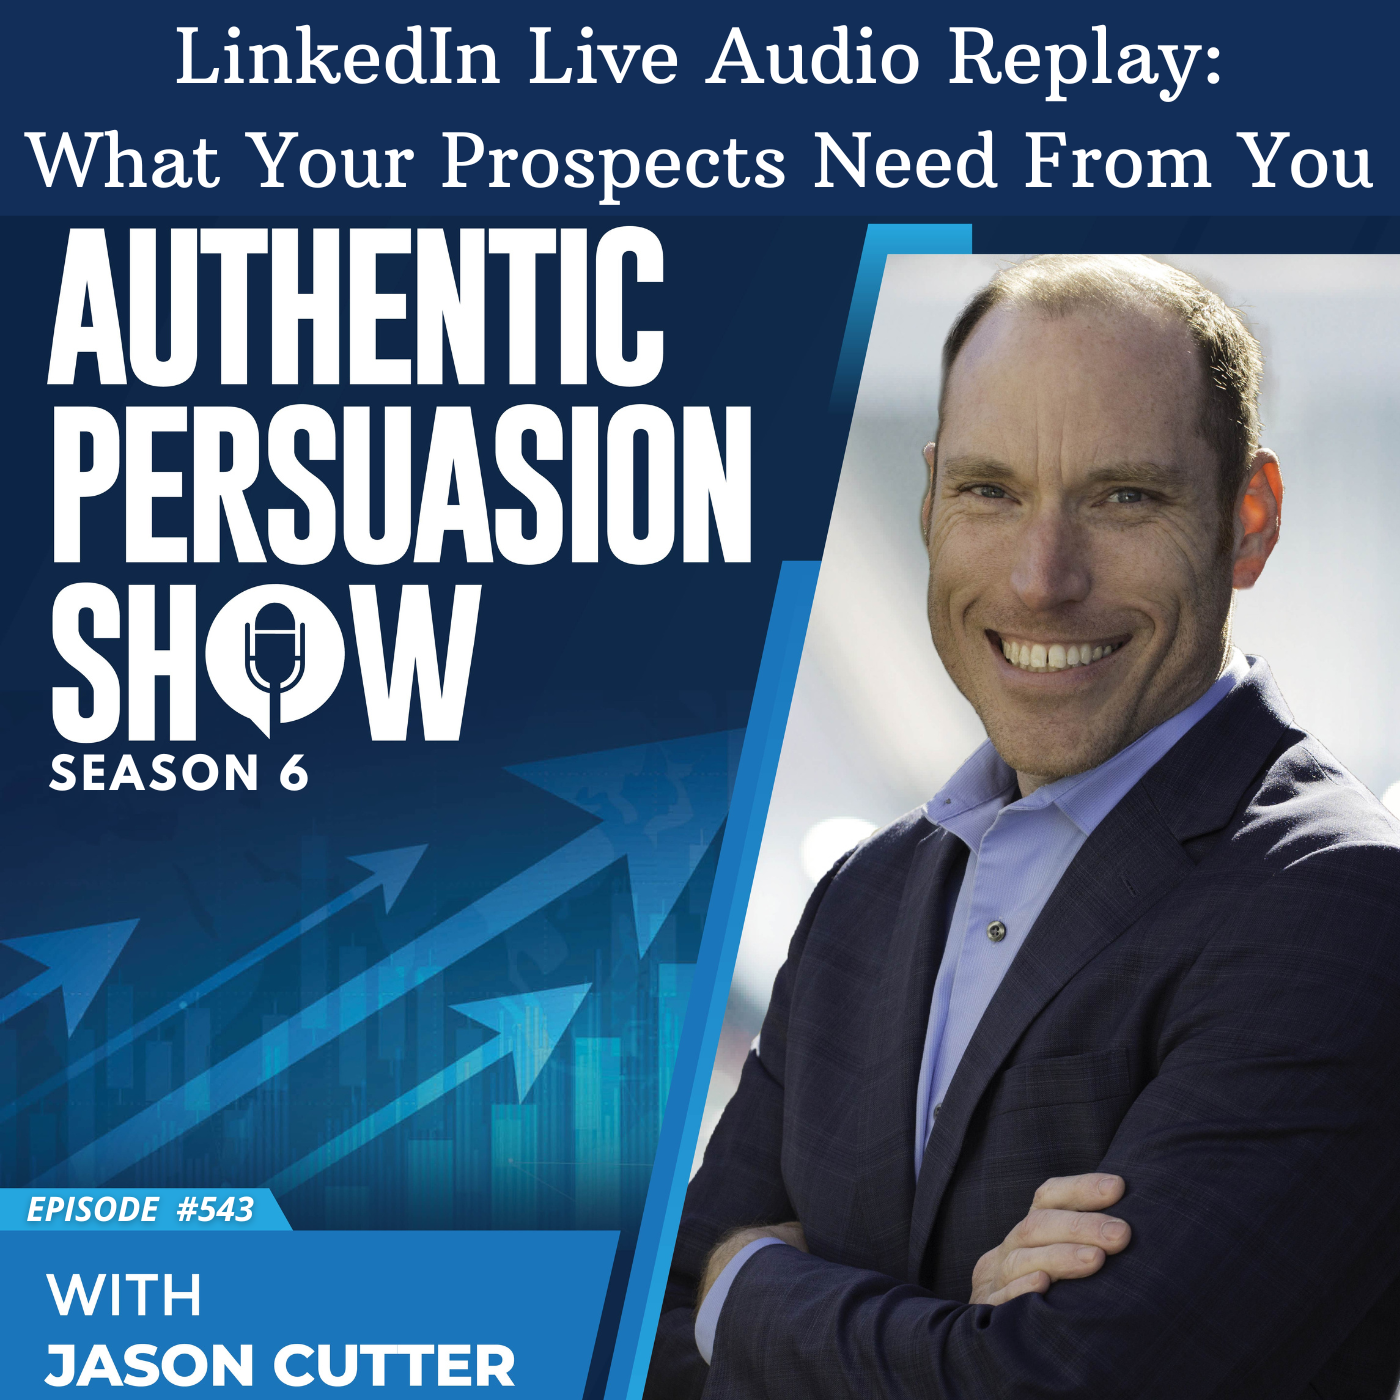 [543] LinkedIn Live Audio Replay: What Your Prospects Need From You